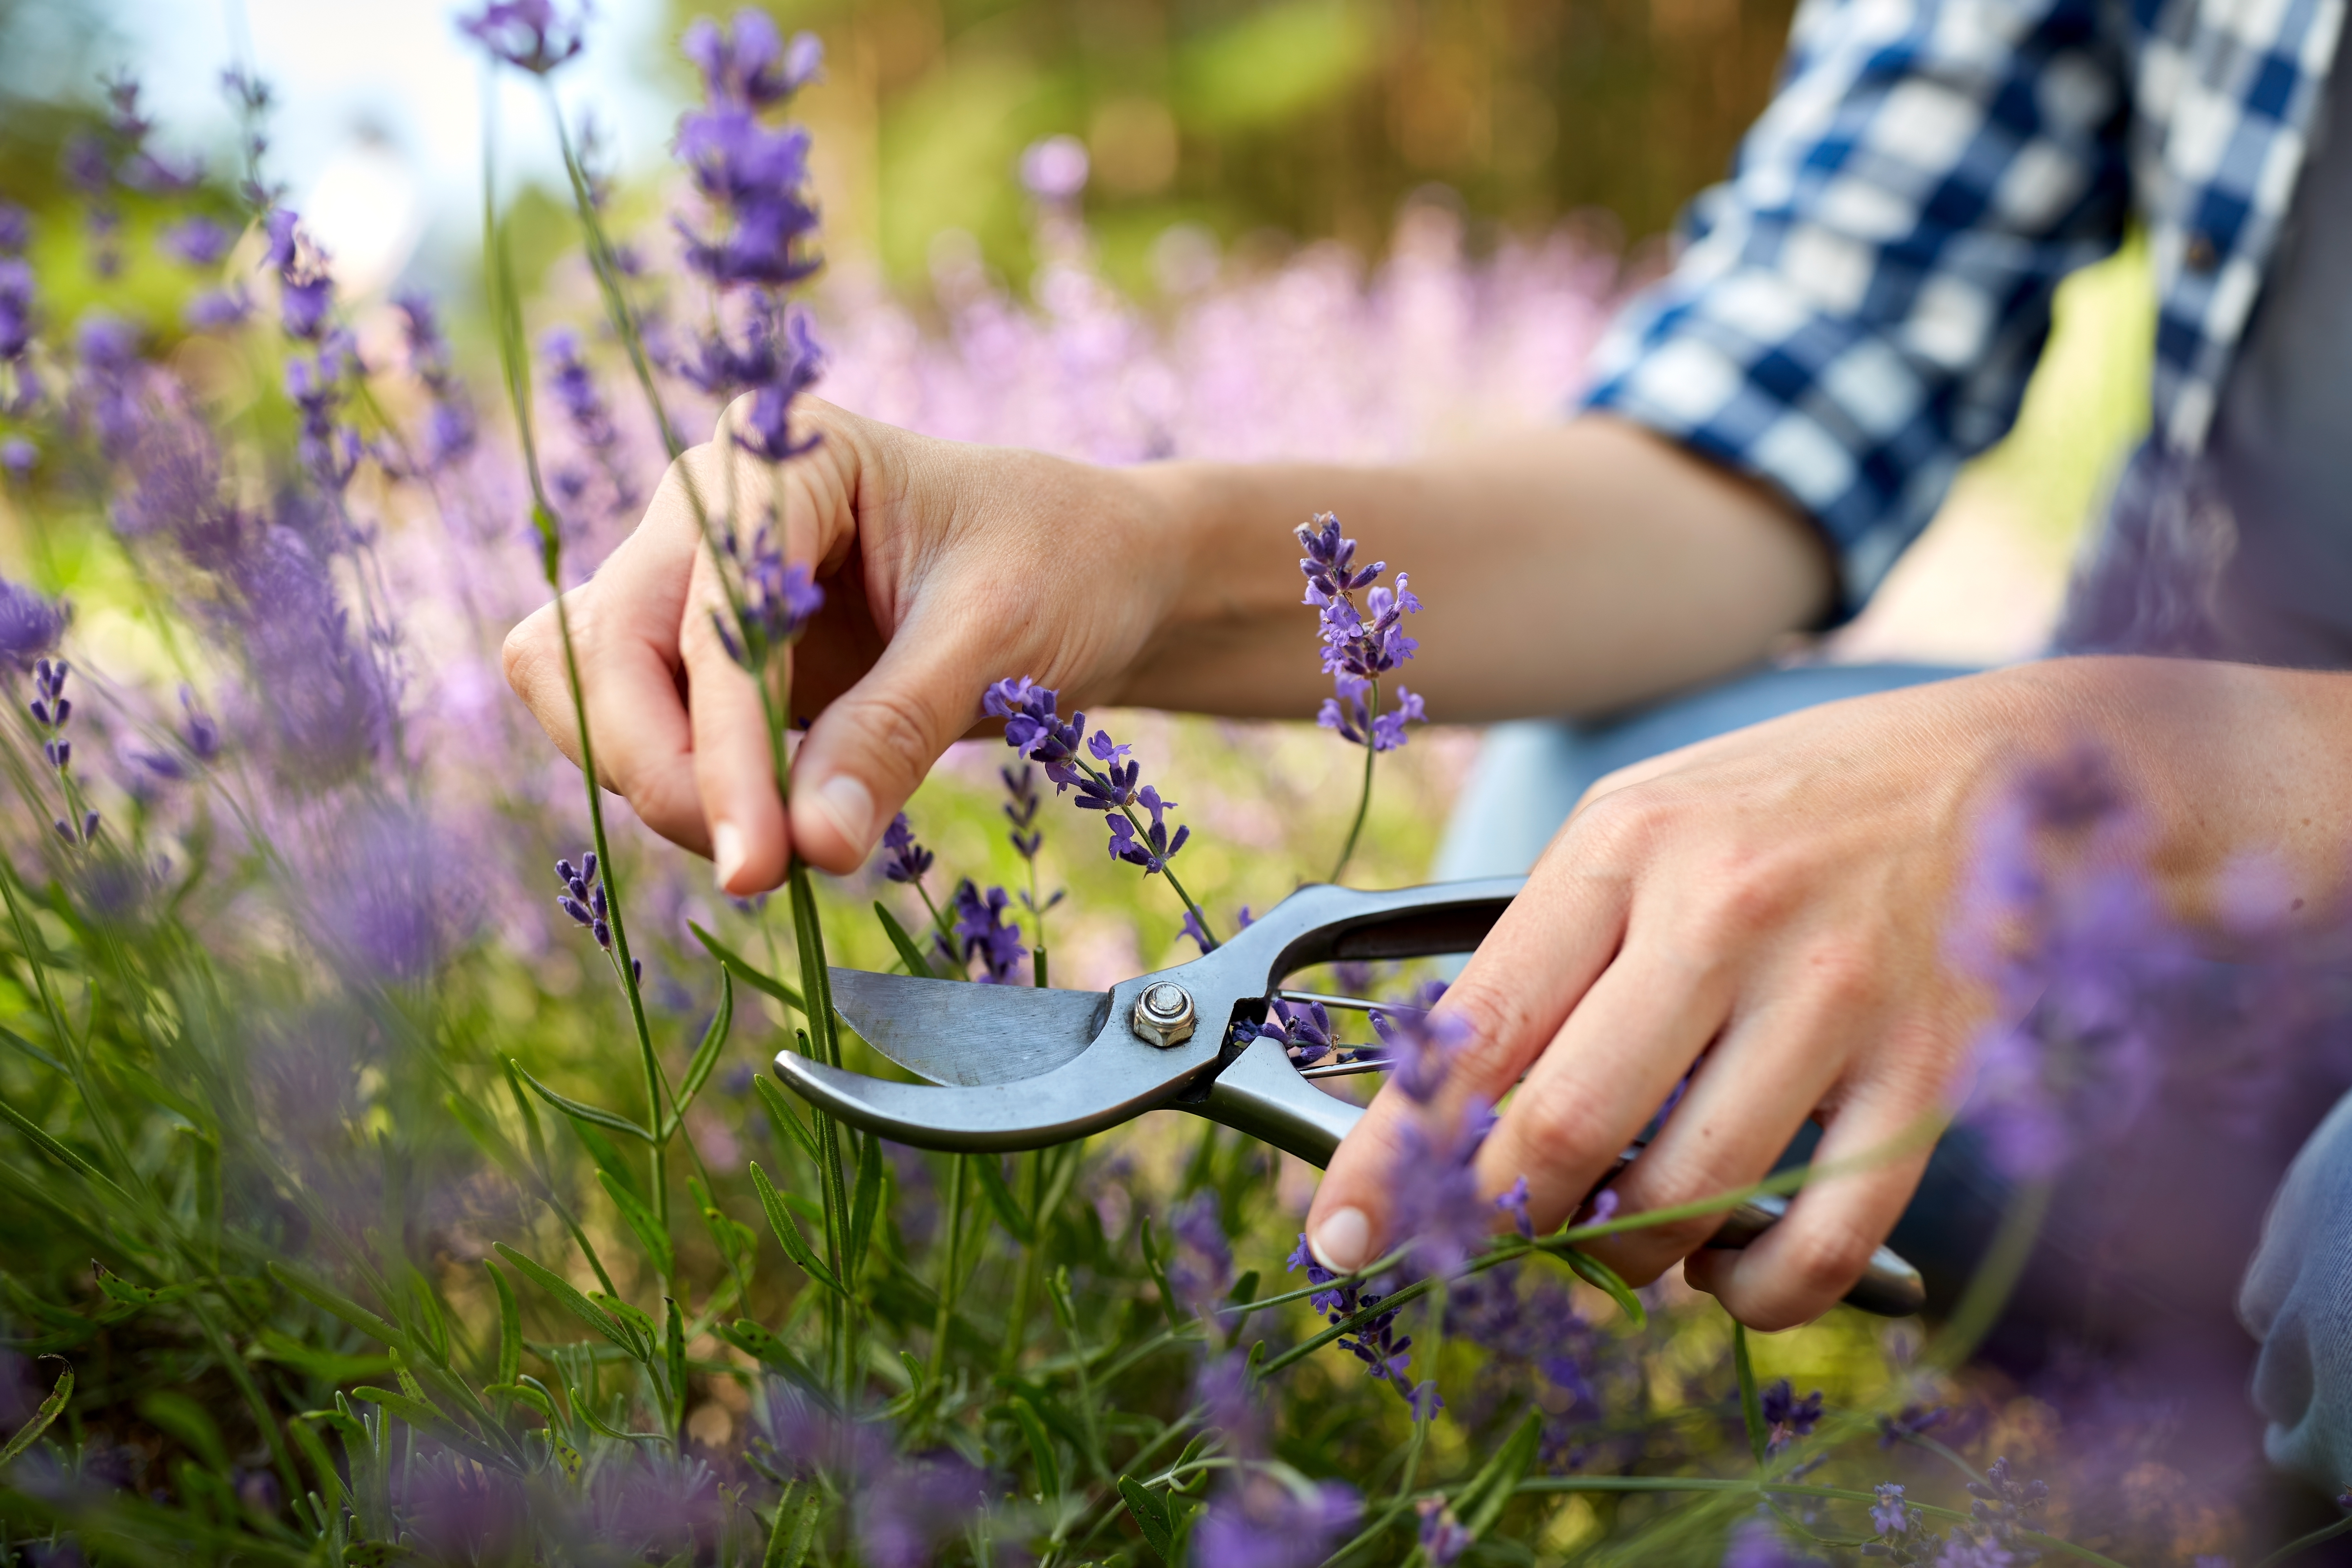 Pruning a lavender plant